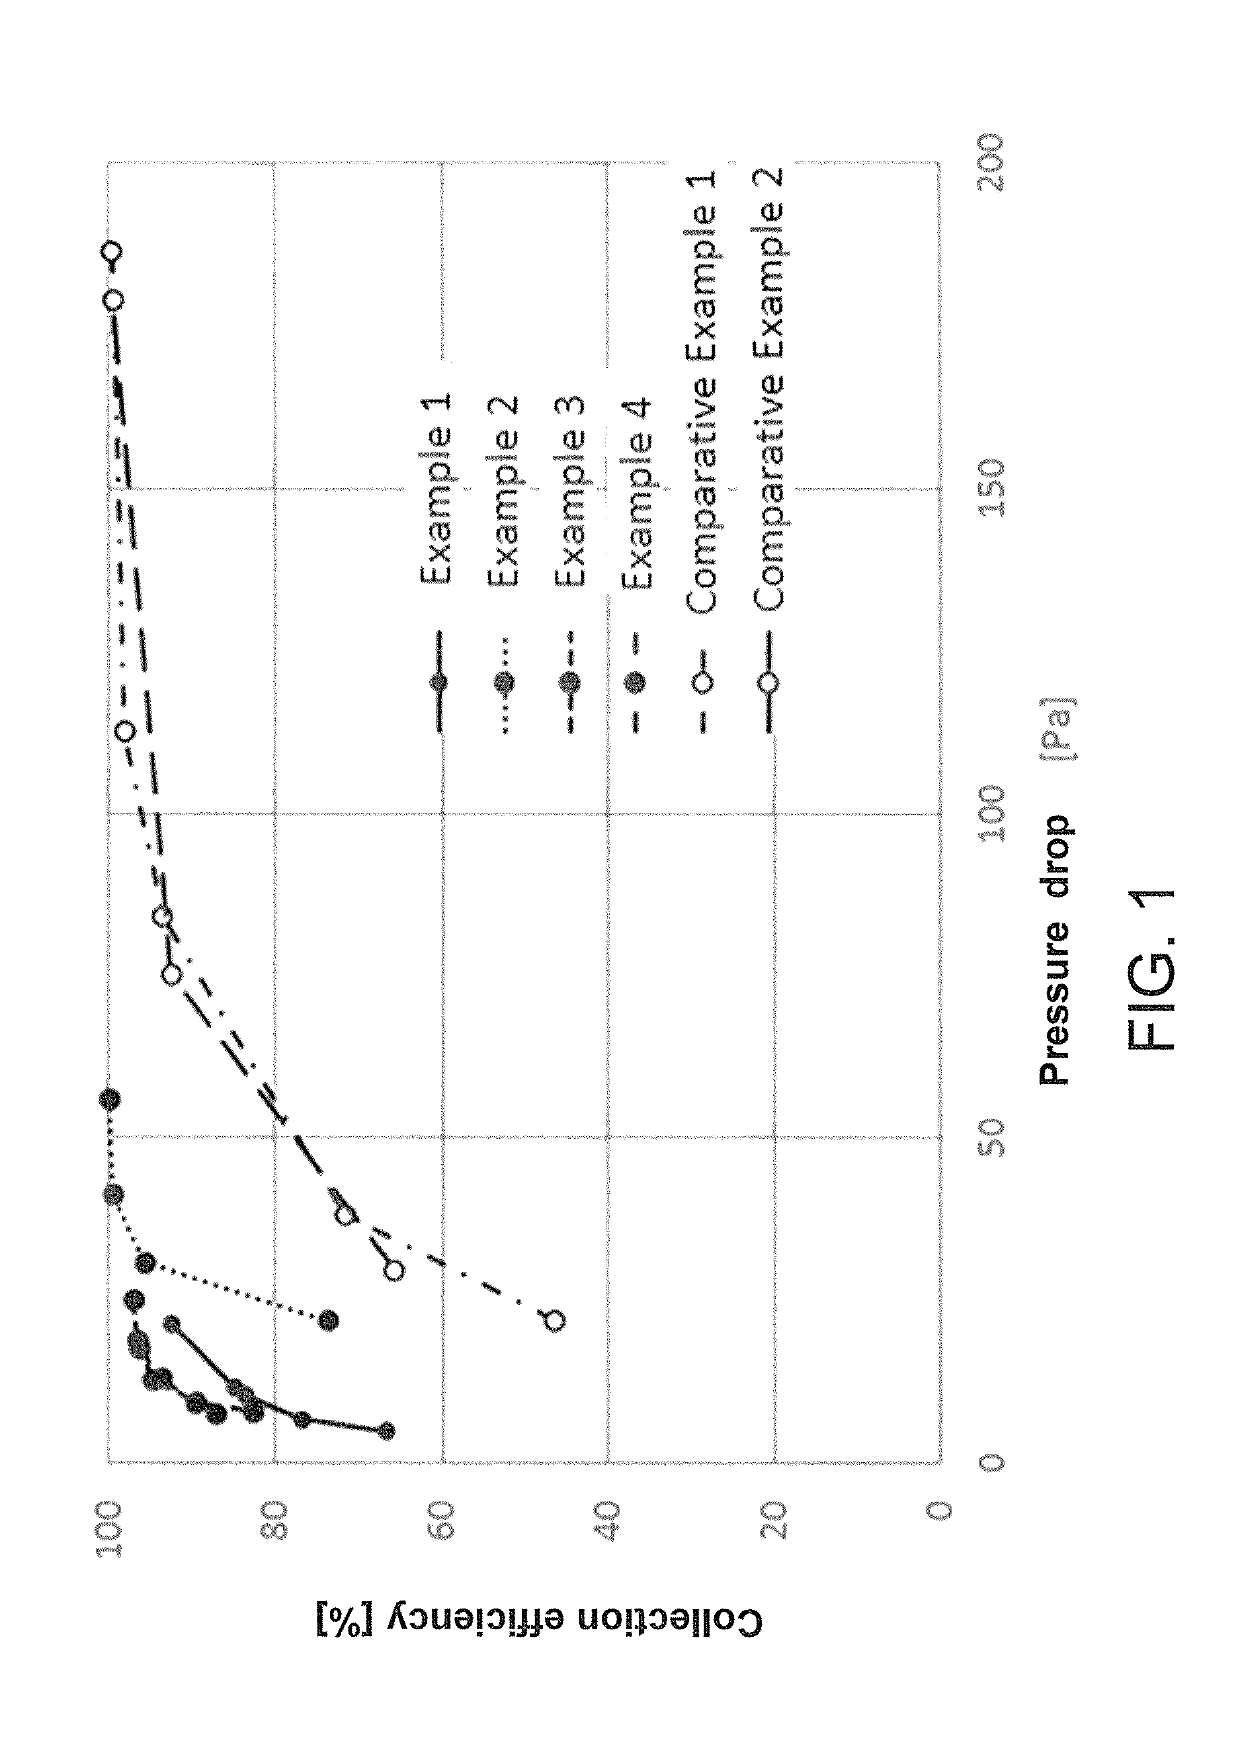 Filter medium and production method for fibrous structure for filter medium